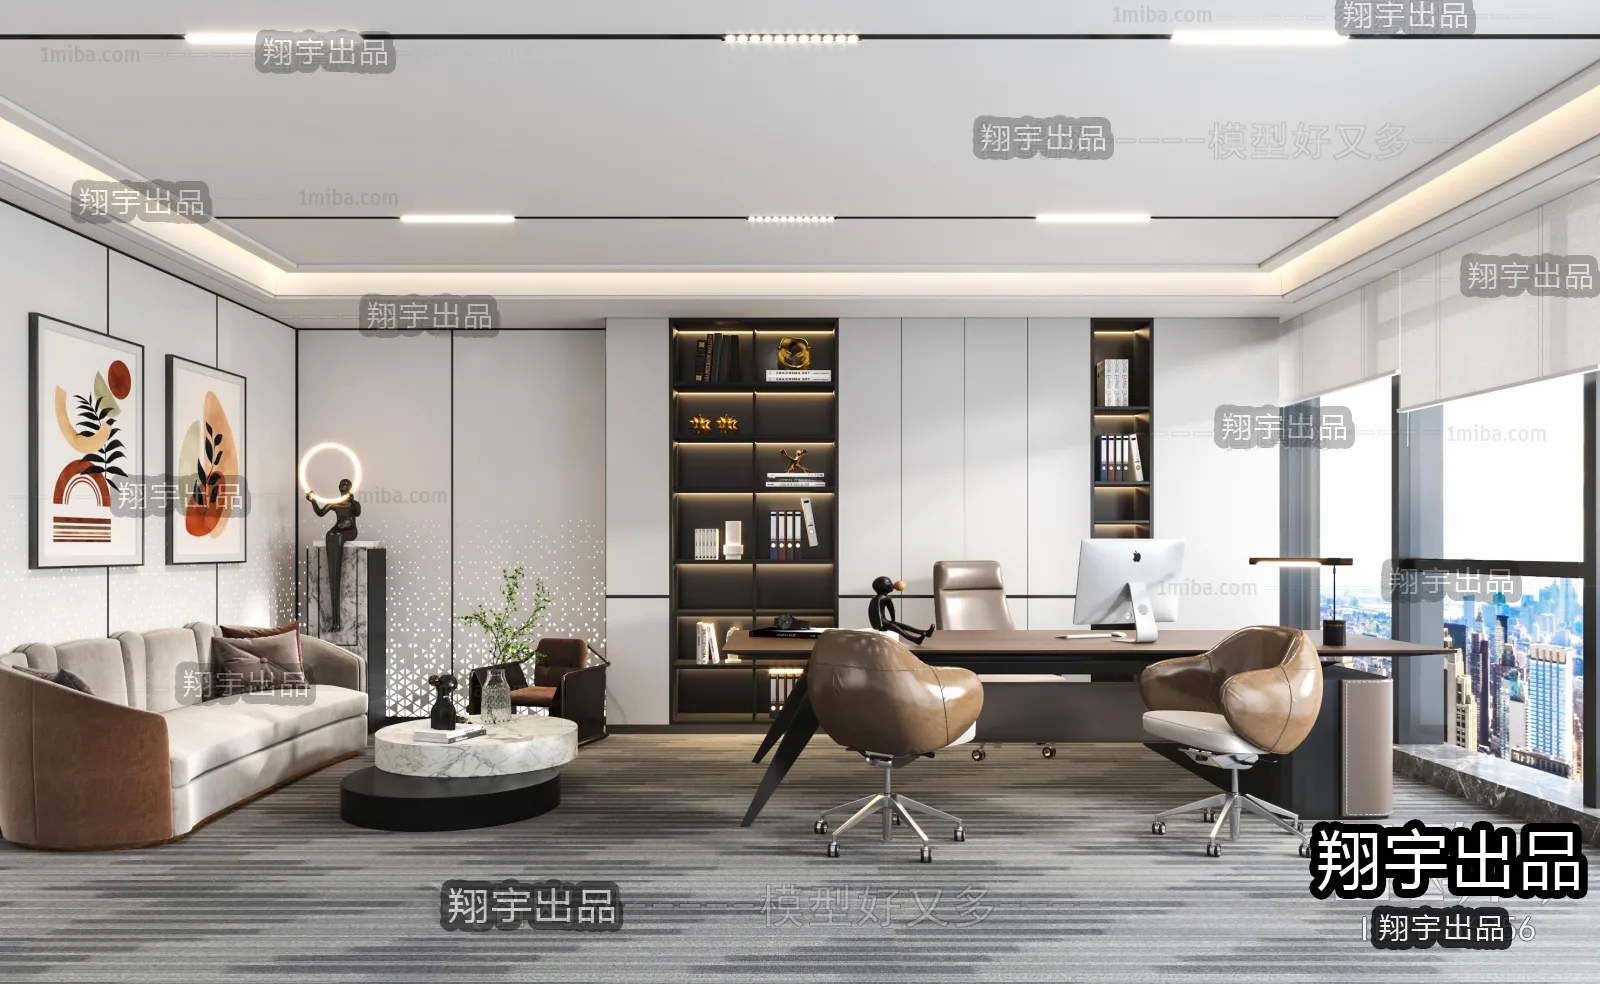 3D OFFICE INTERIOR (VRAY) – MANAGER ROOM 3D SCENES – 105